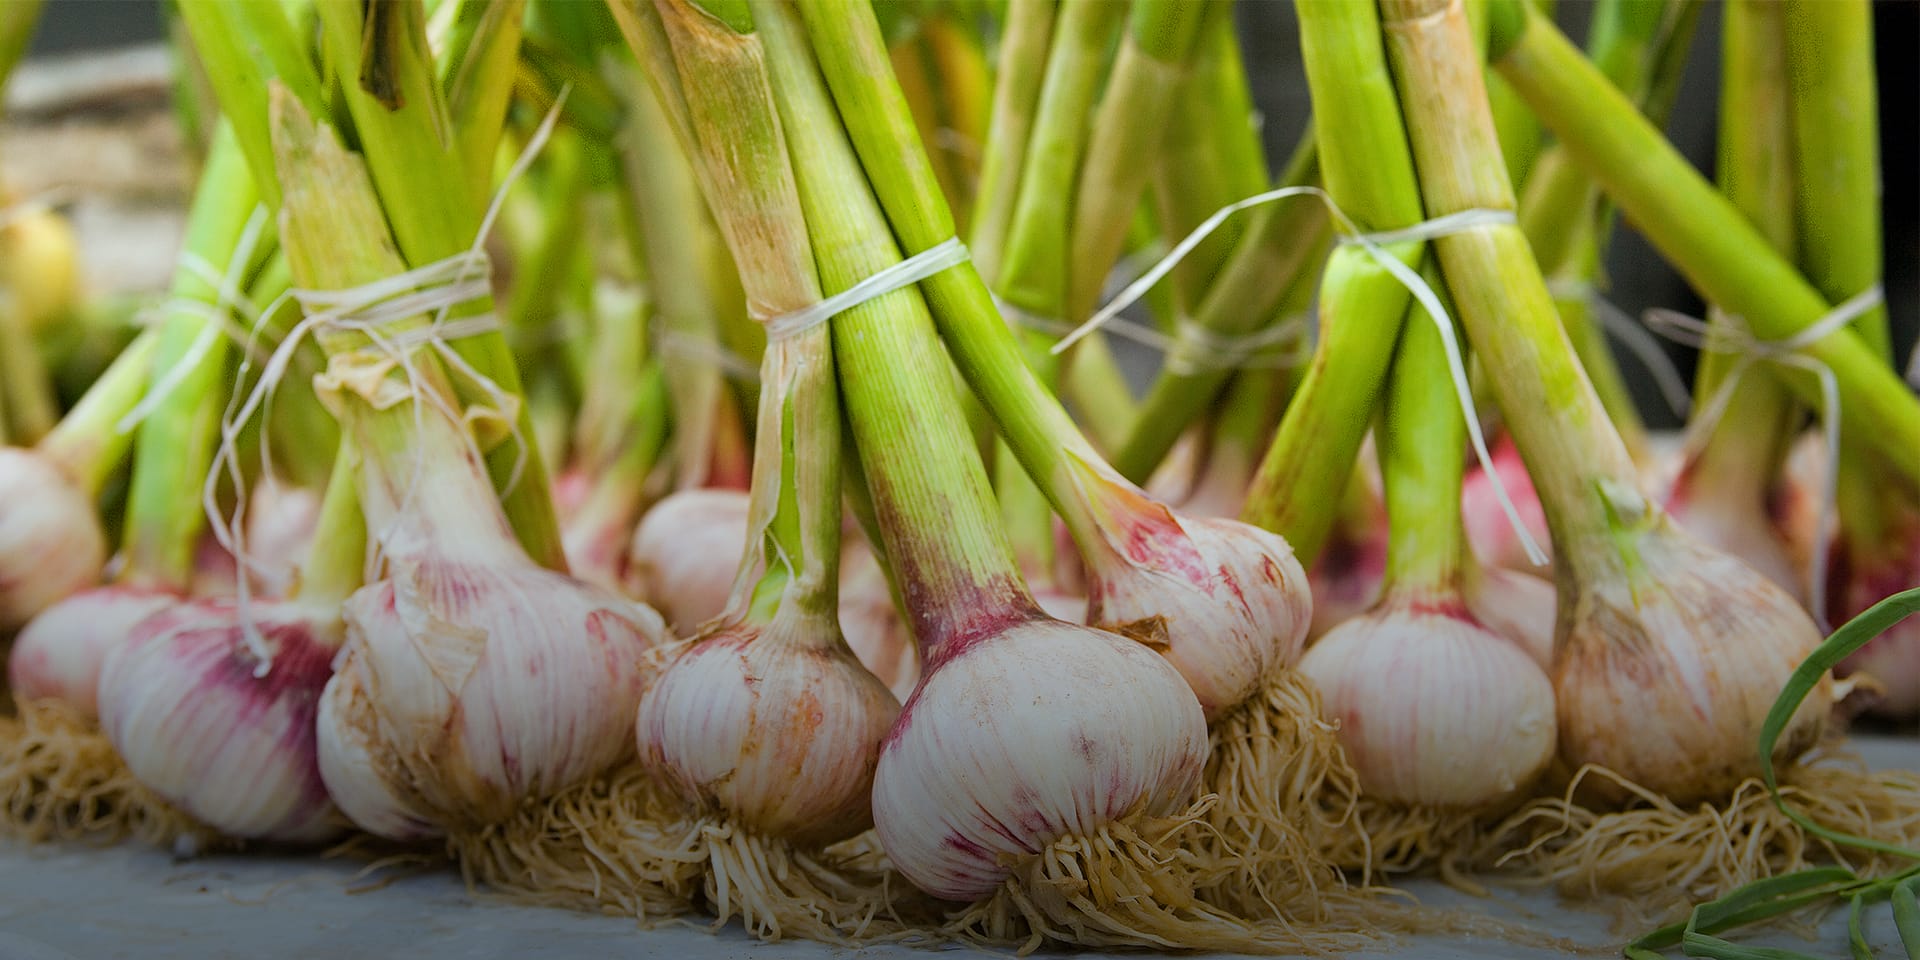 A close-up image of green onions bundled together with string.